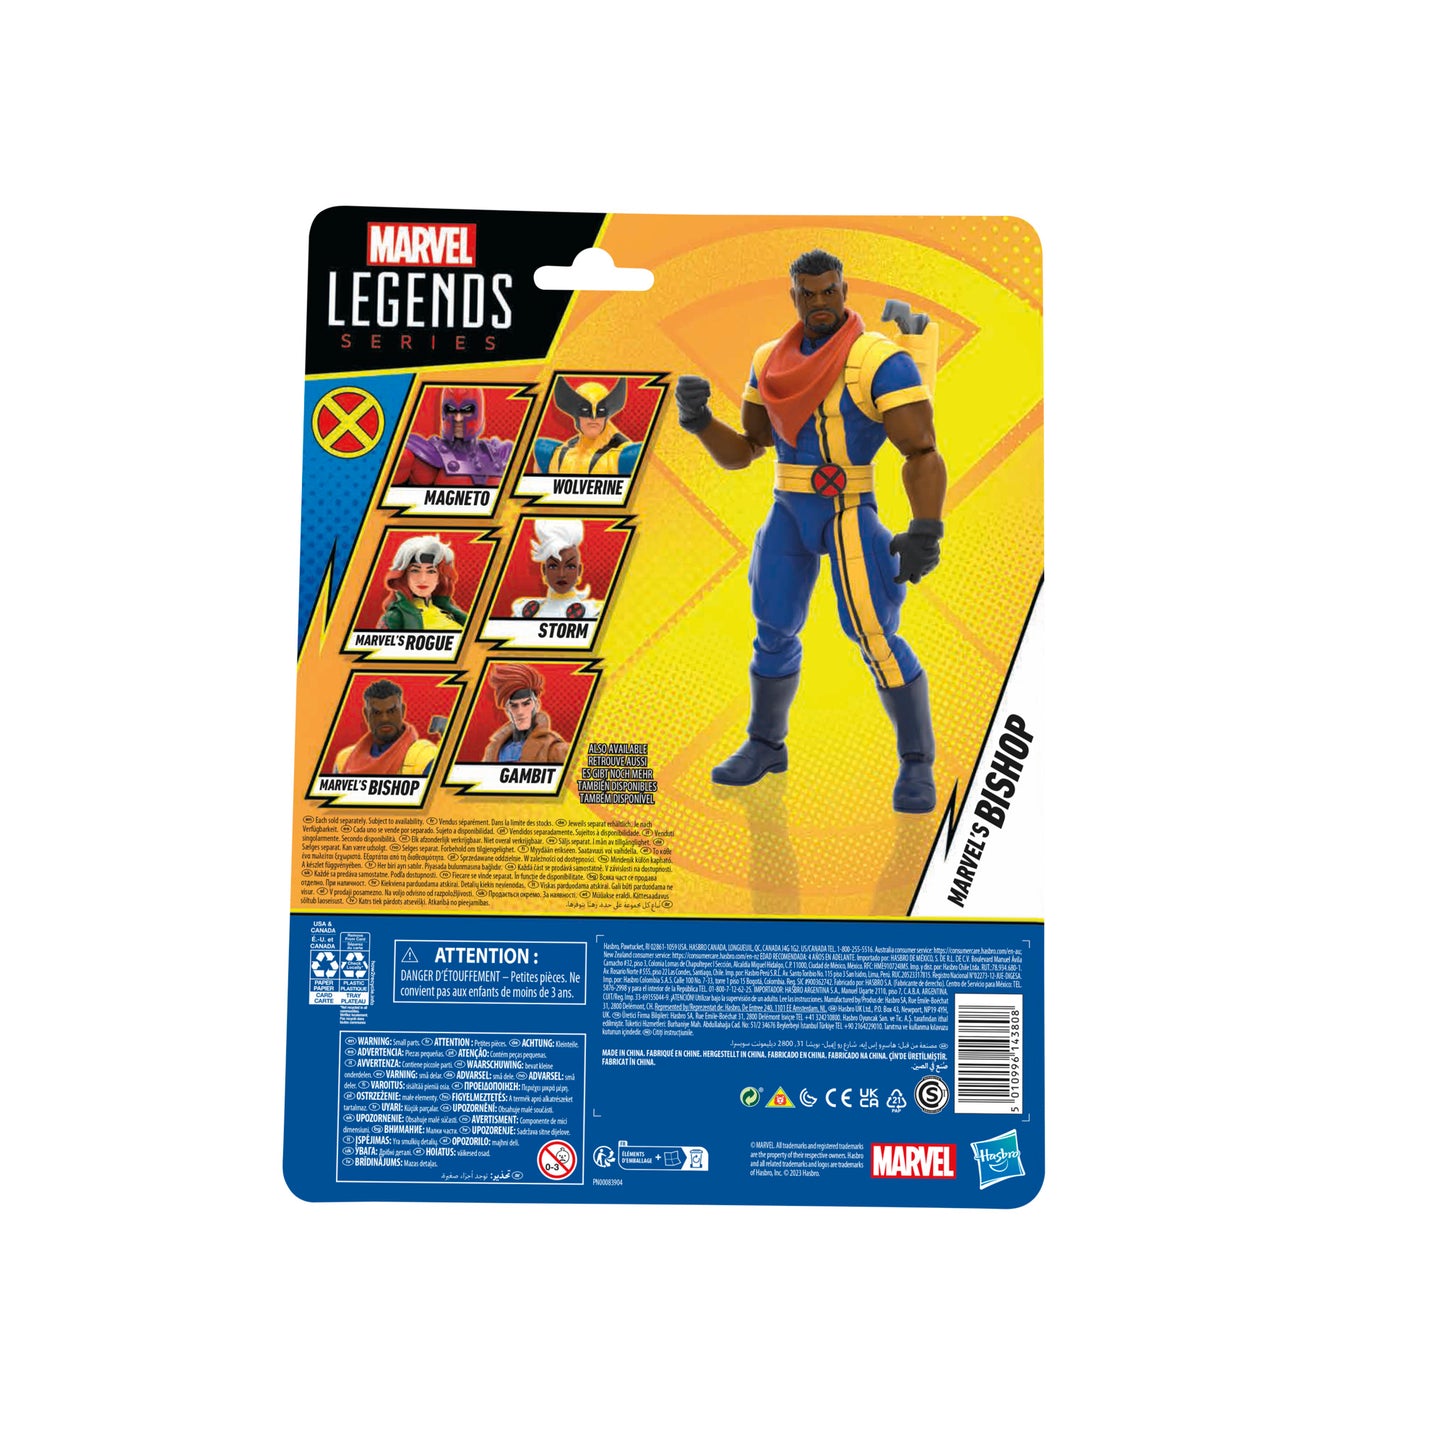 Hasbro Marvel Legends Series Marvel’s Bishop Action Figure Toy in a Package back view - Heretoserveyou